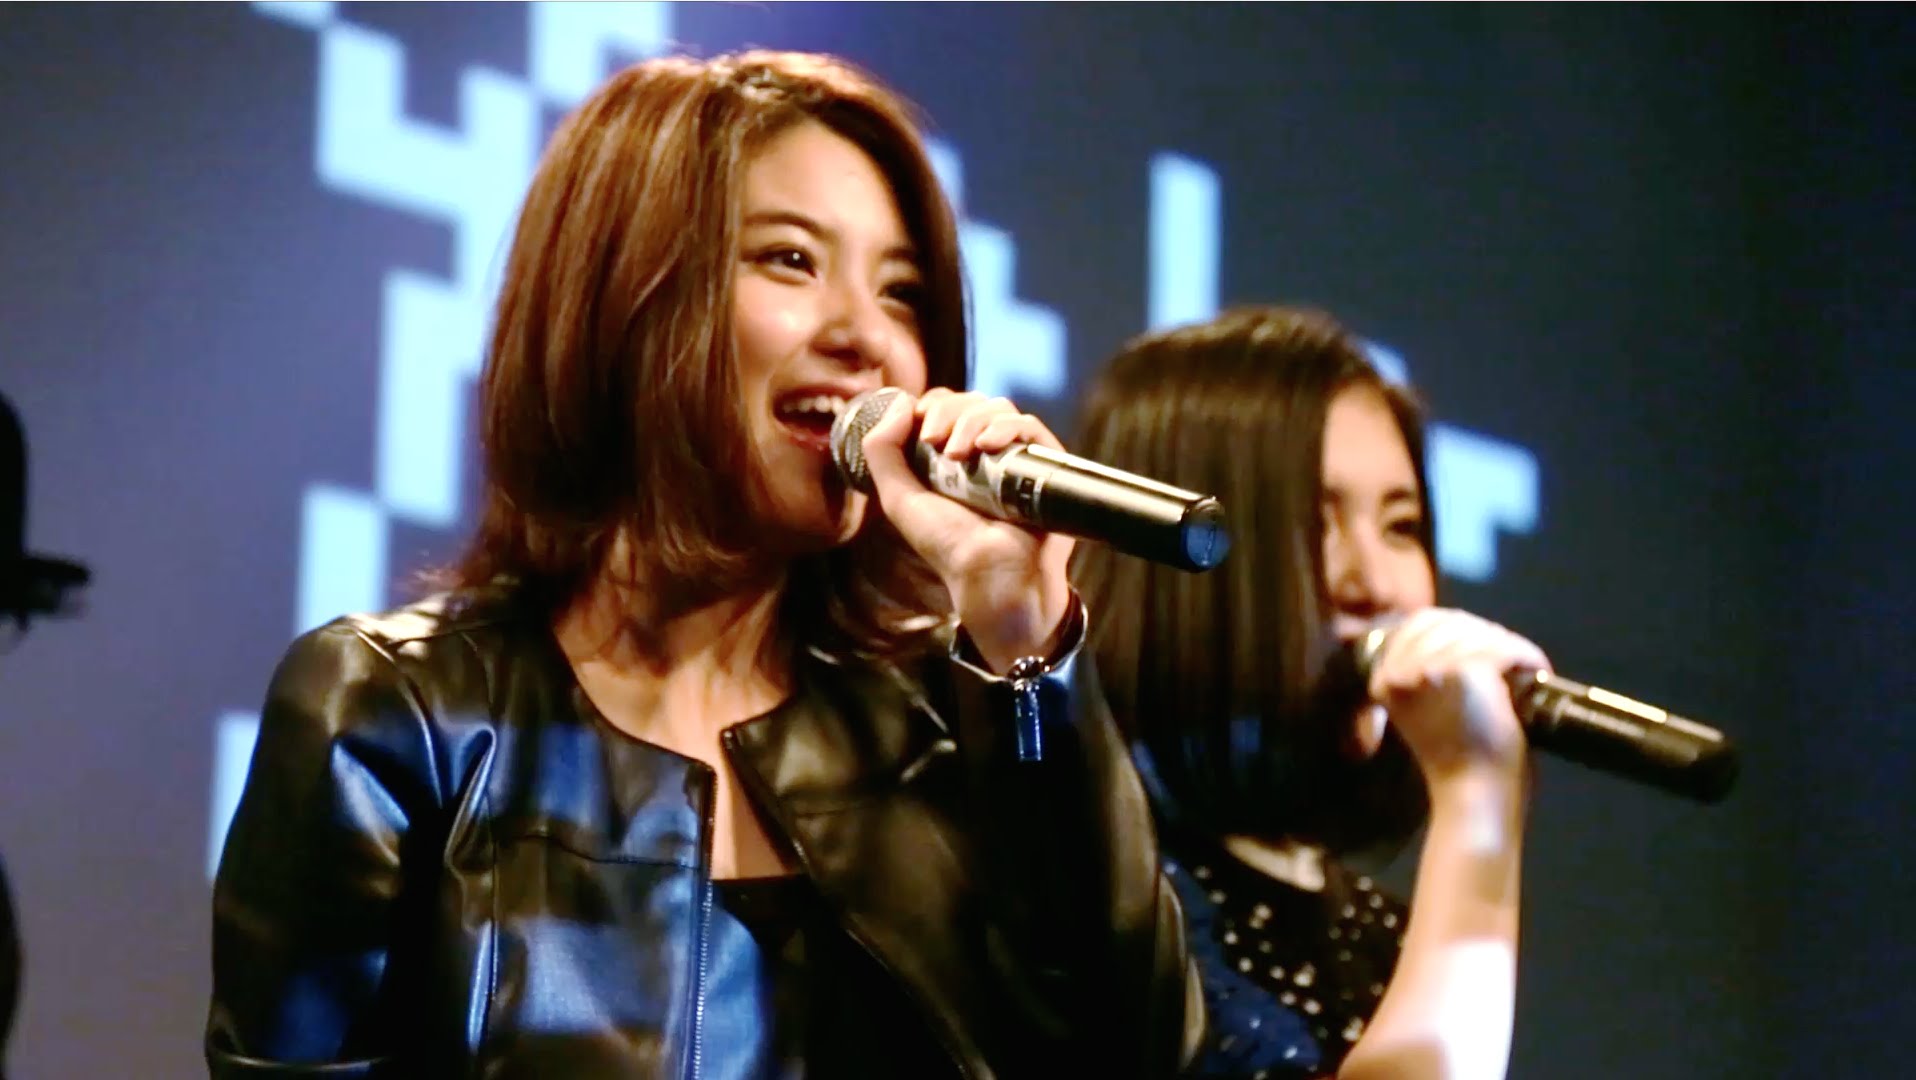 Spica no Yoru Rock 2.5D Studio at Shibuya PARCO in the Live MV for “YEAH!!!”